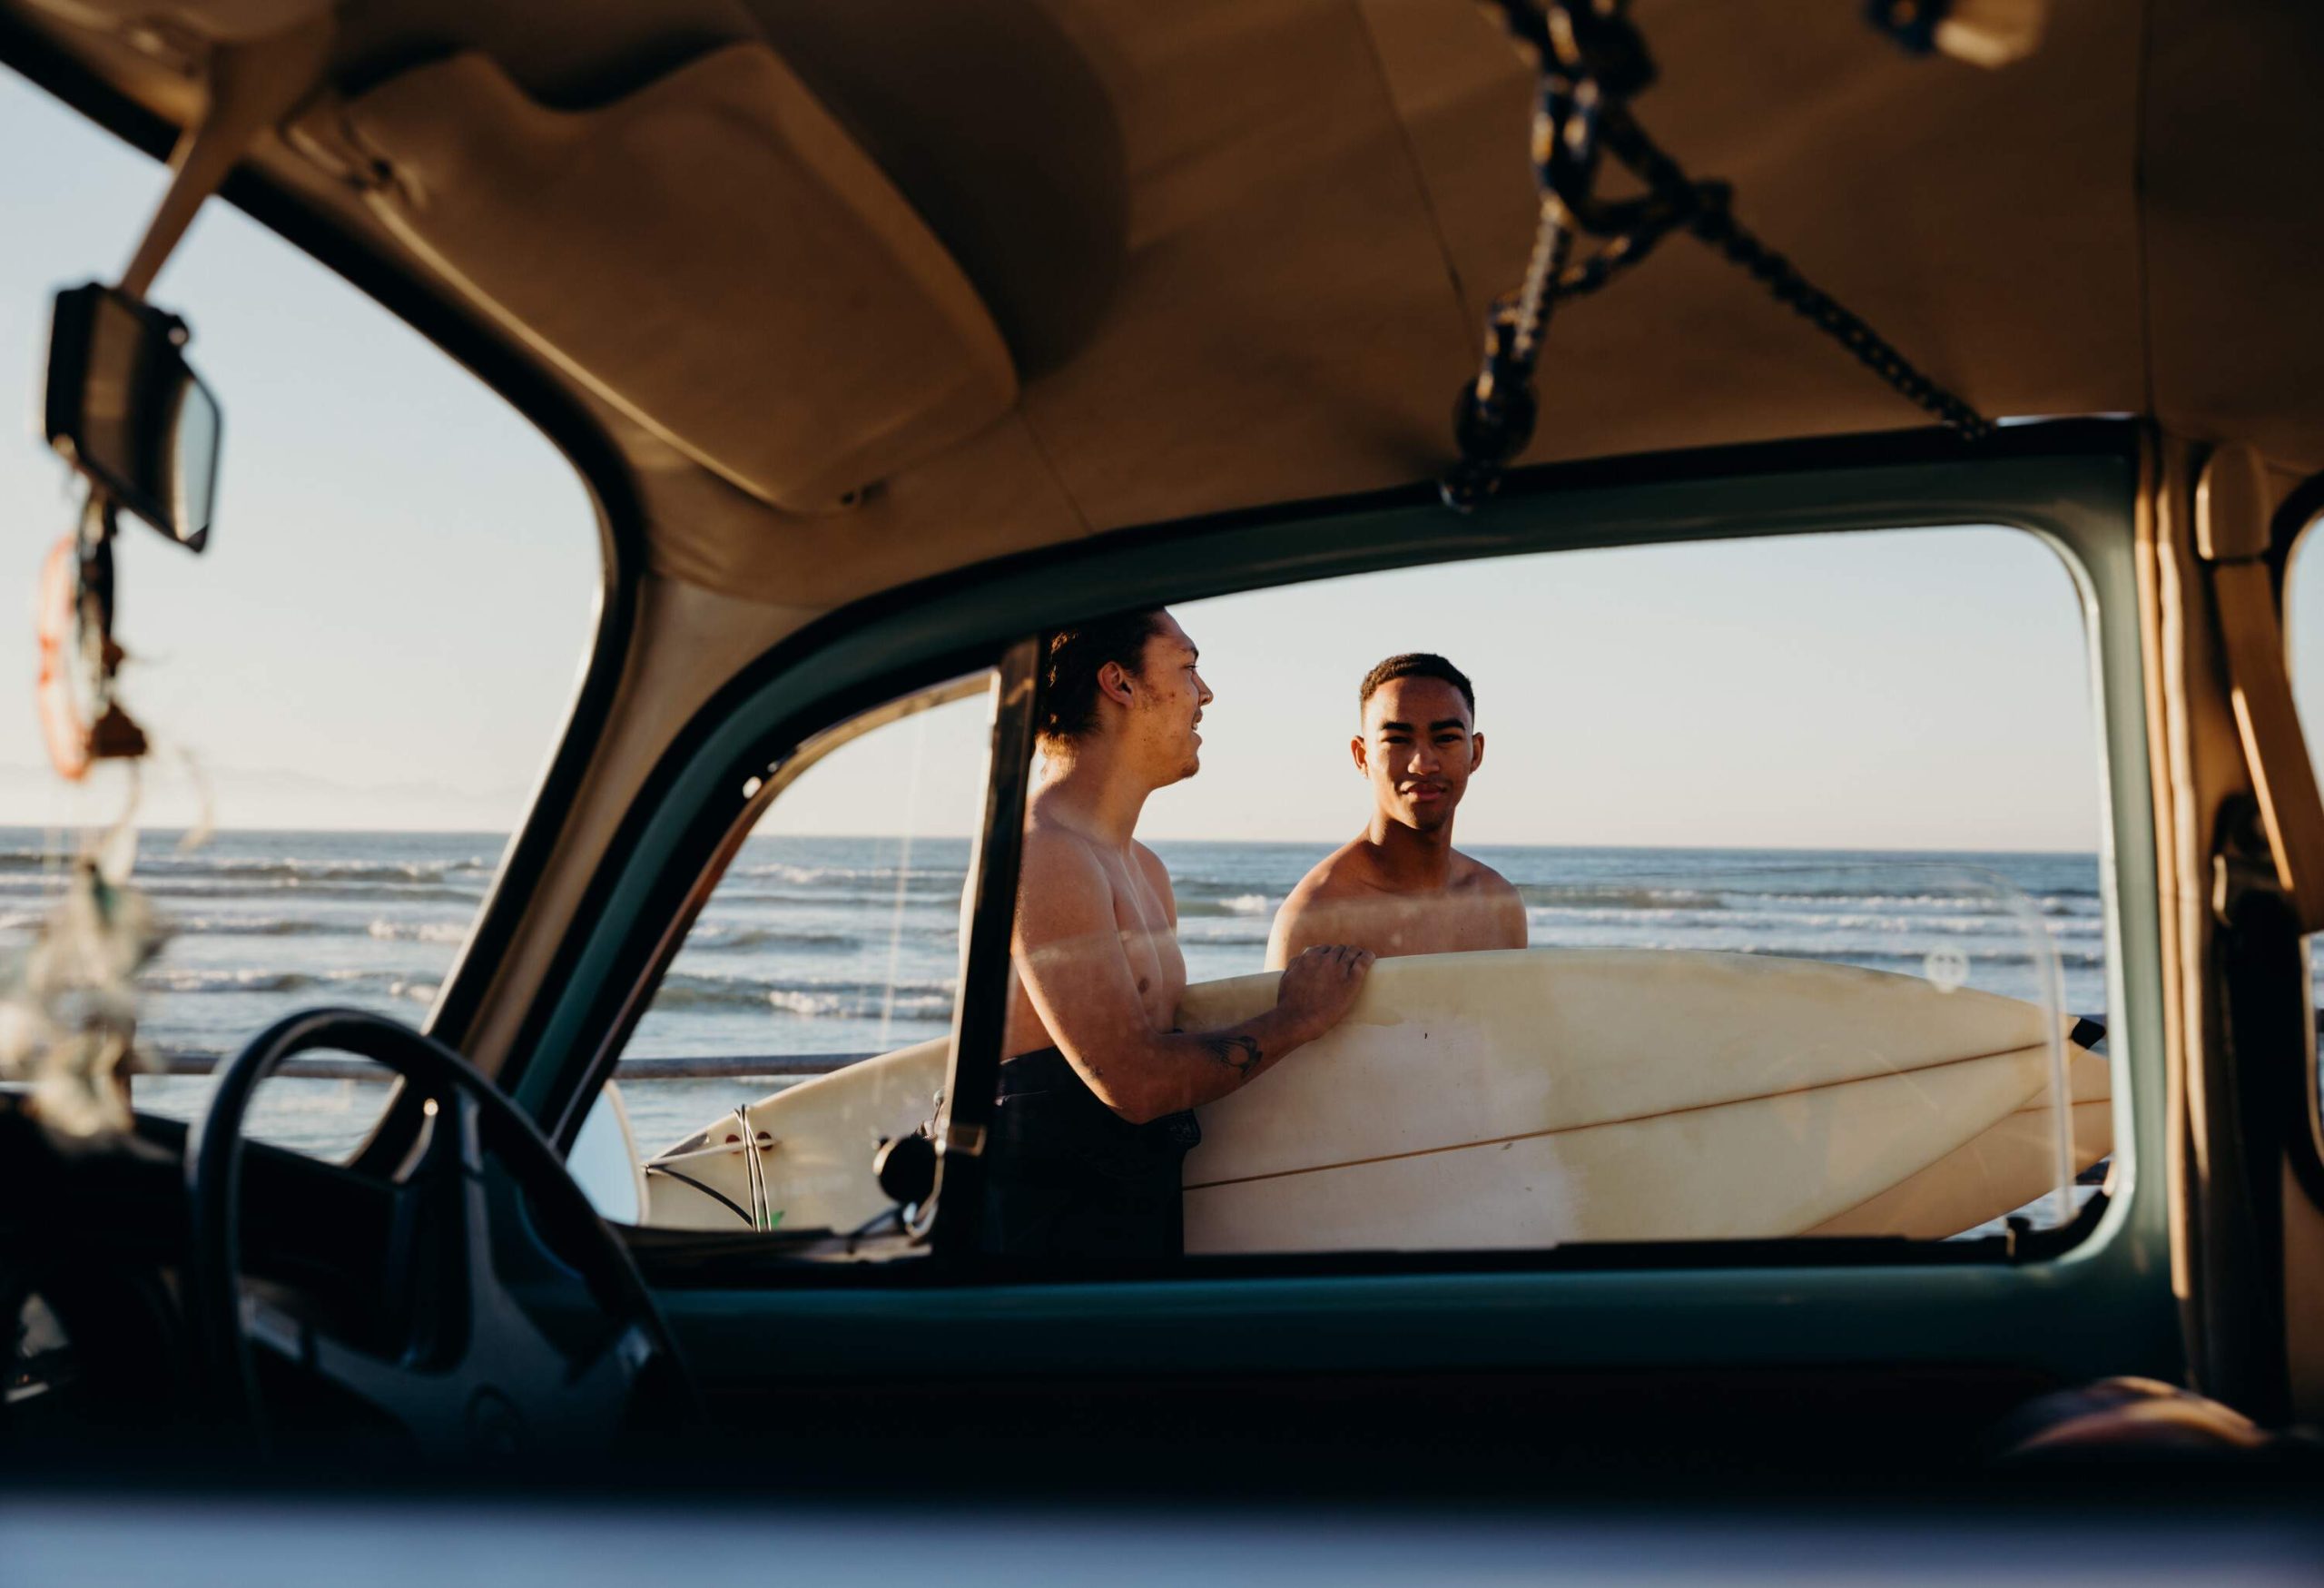 Two men walk on a beach with their surfboards as seen from the interior of a car.